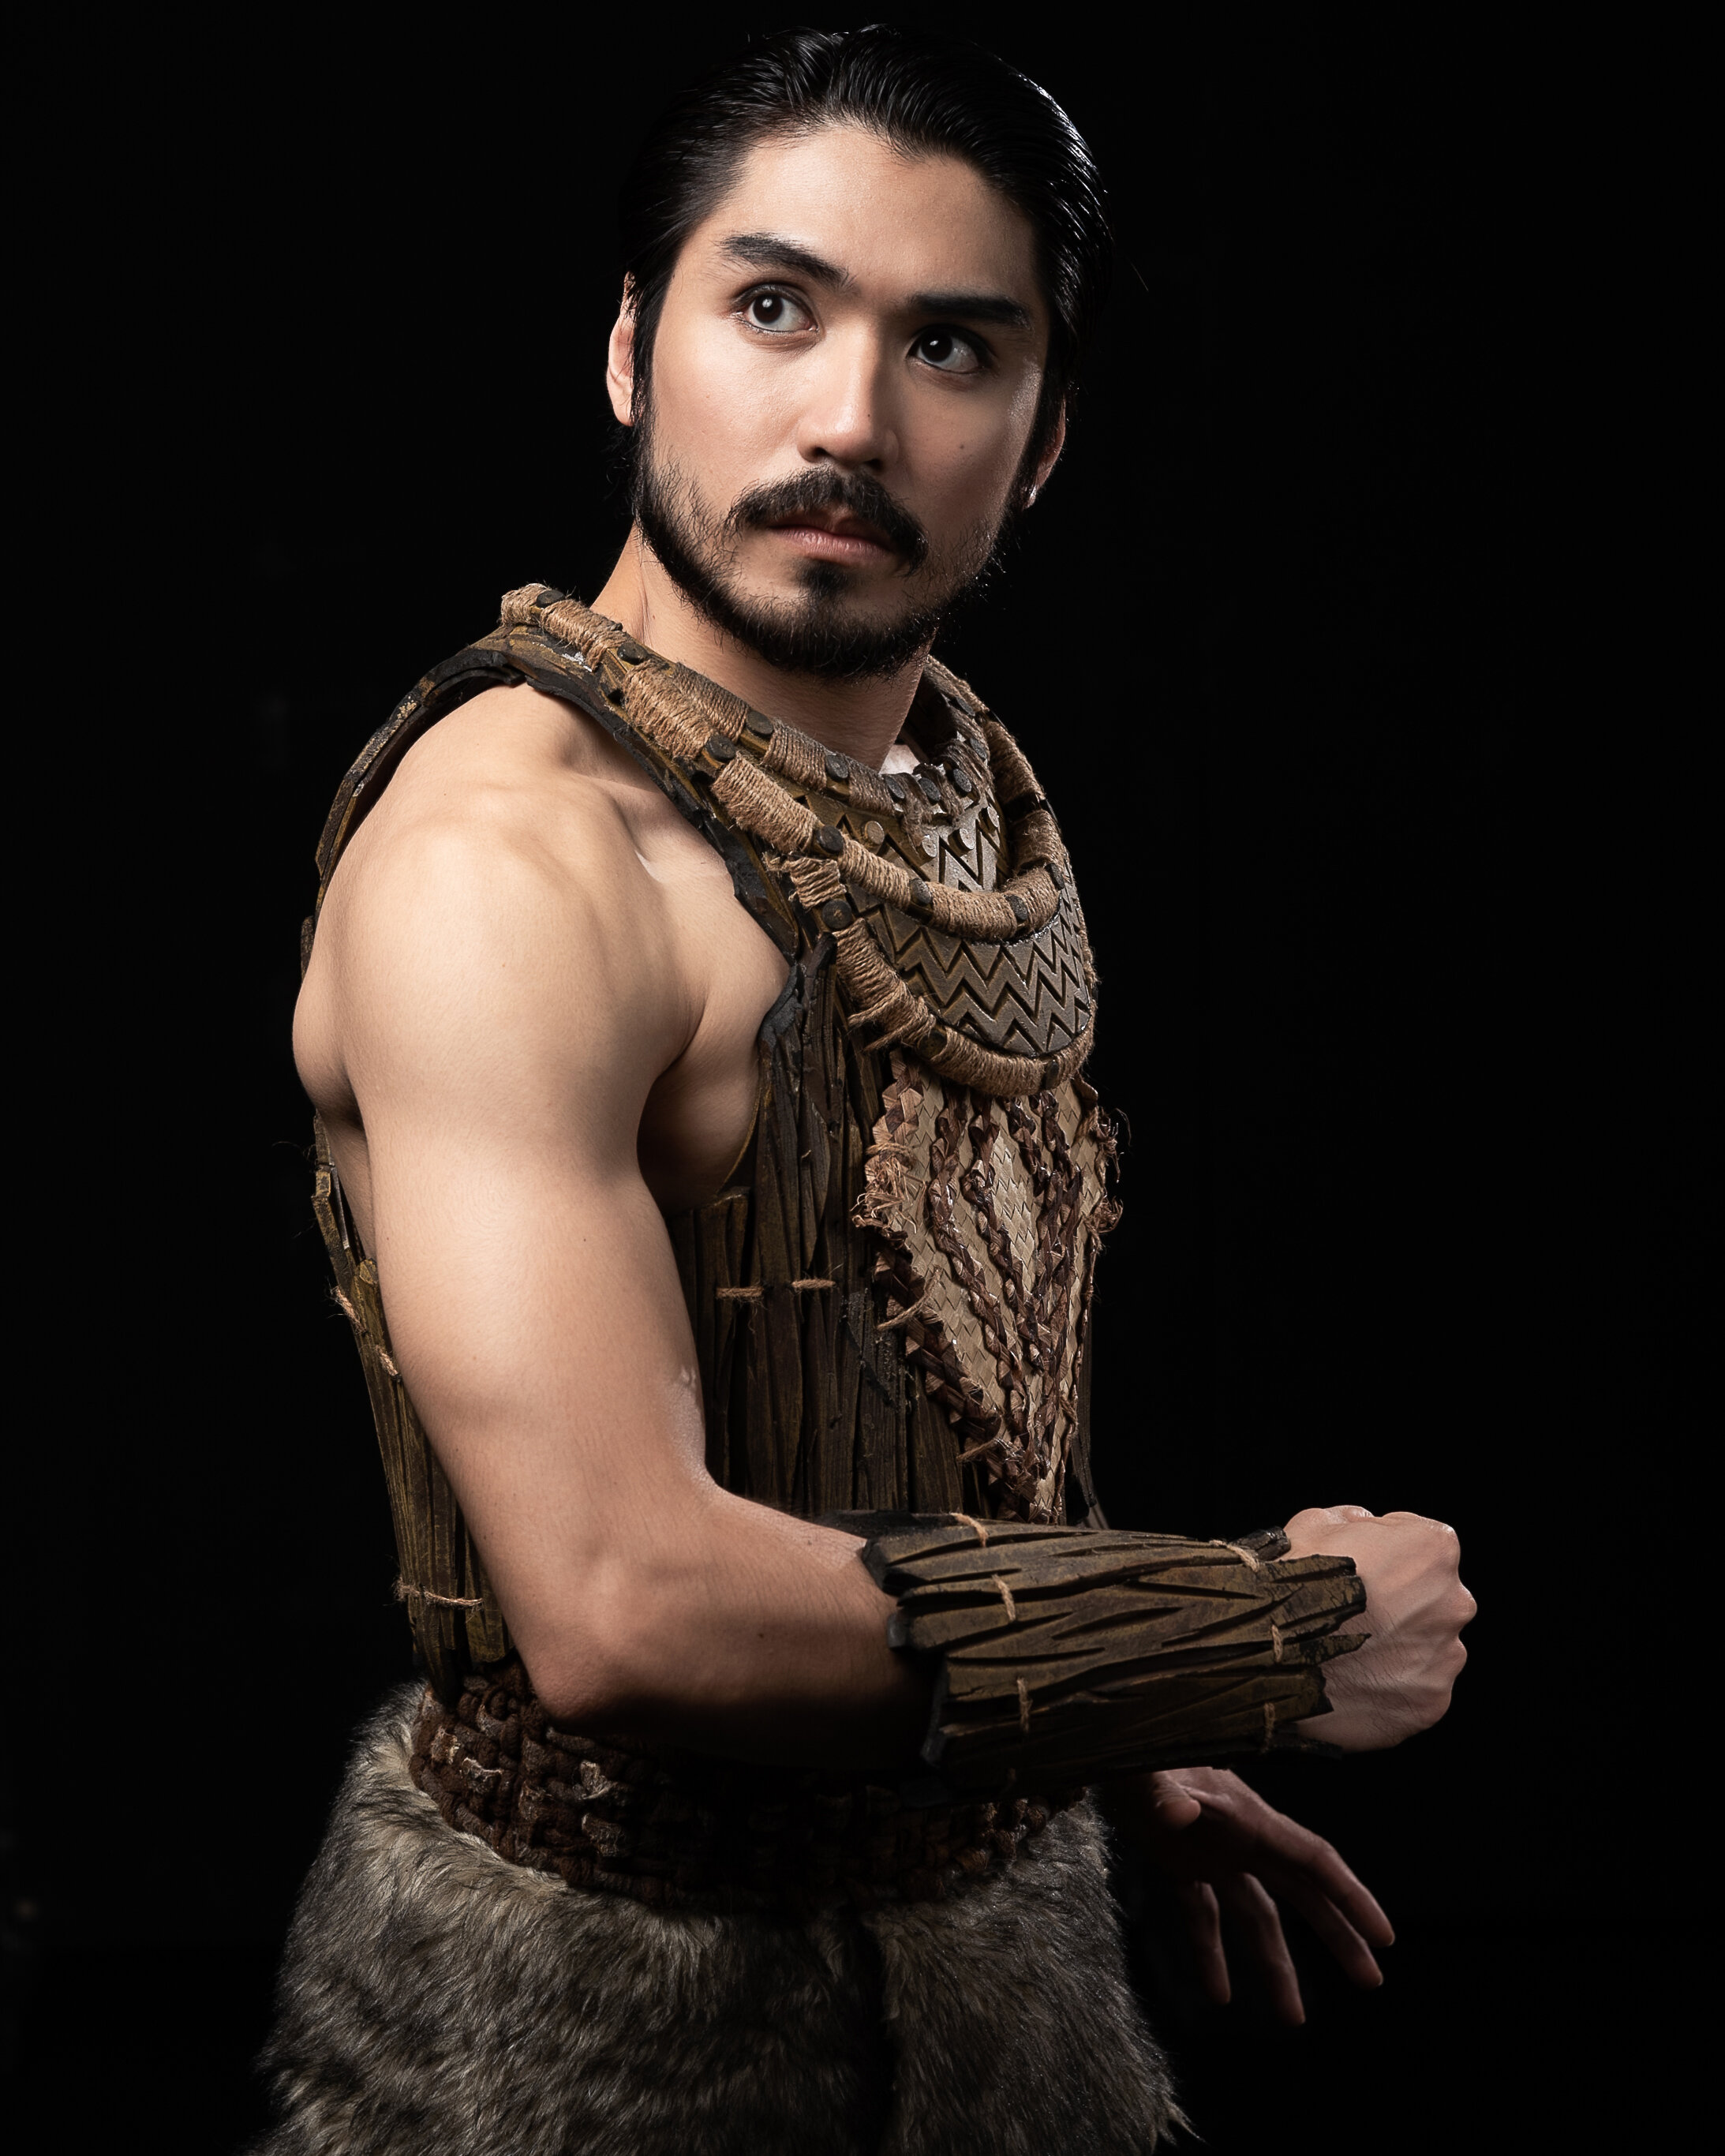  The secondborn, Prinsipe Diego (Romeo Peralta), sets off on the same journey when Prinsipe Pedro fails to return. Photo courtesy of MarBi Photography and Project Art, Inc. 